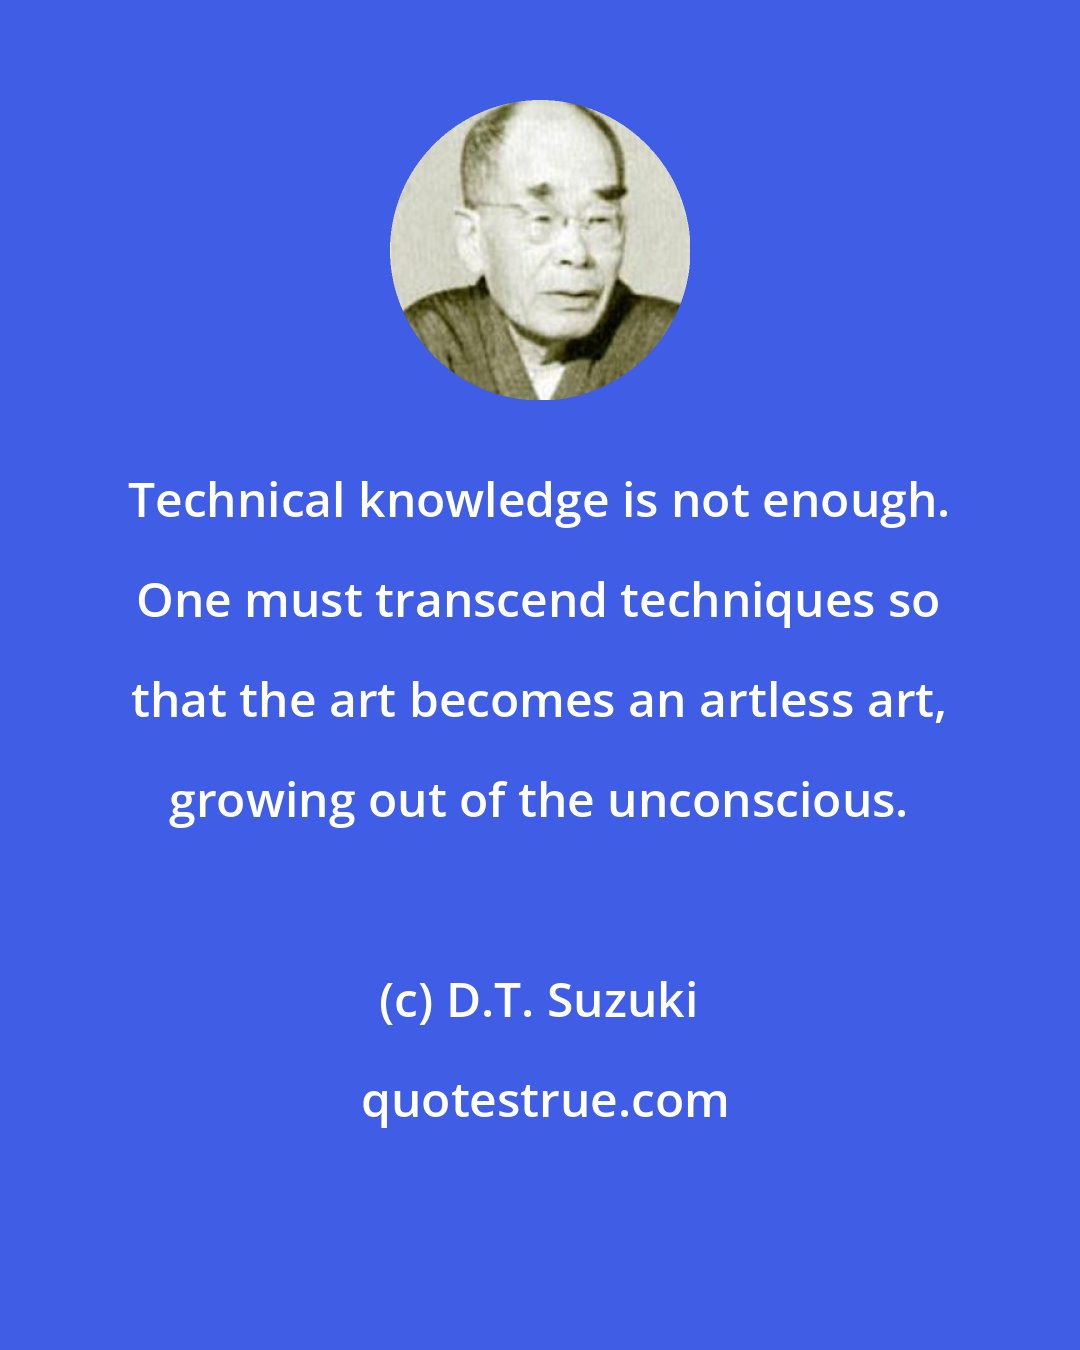 D.T. Suzuki: Technical knowledge is not enough. One must transcend techniques so that the art becomes an artless art, growing out of the unconscious.